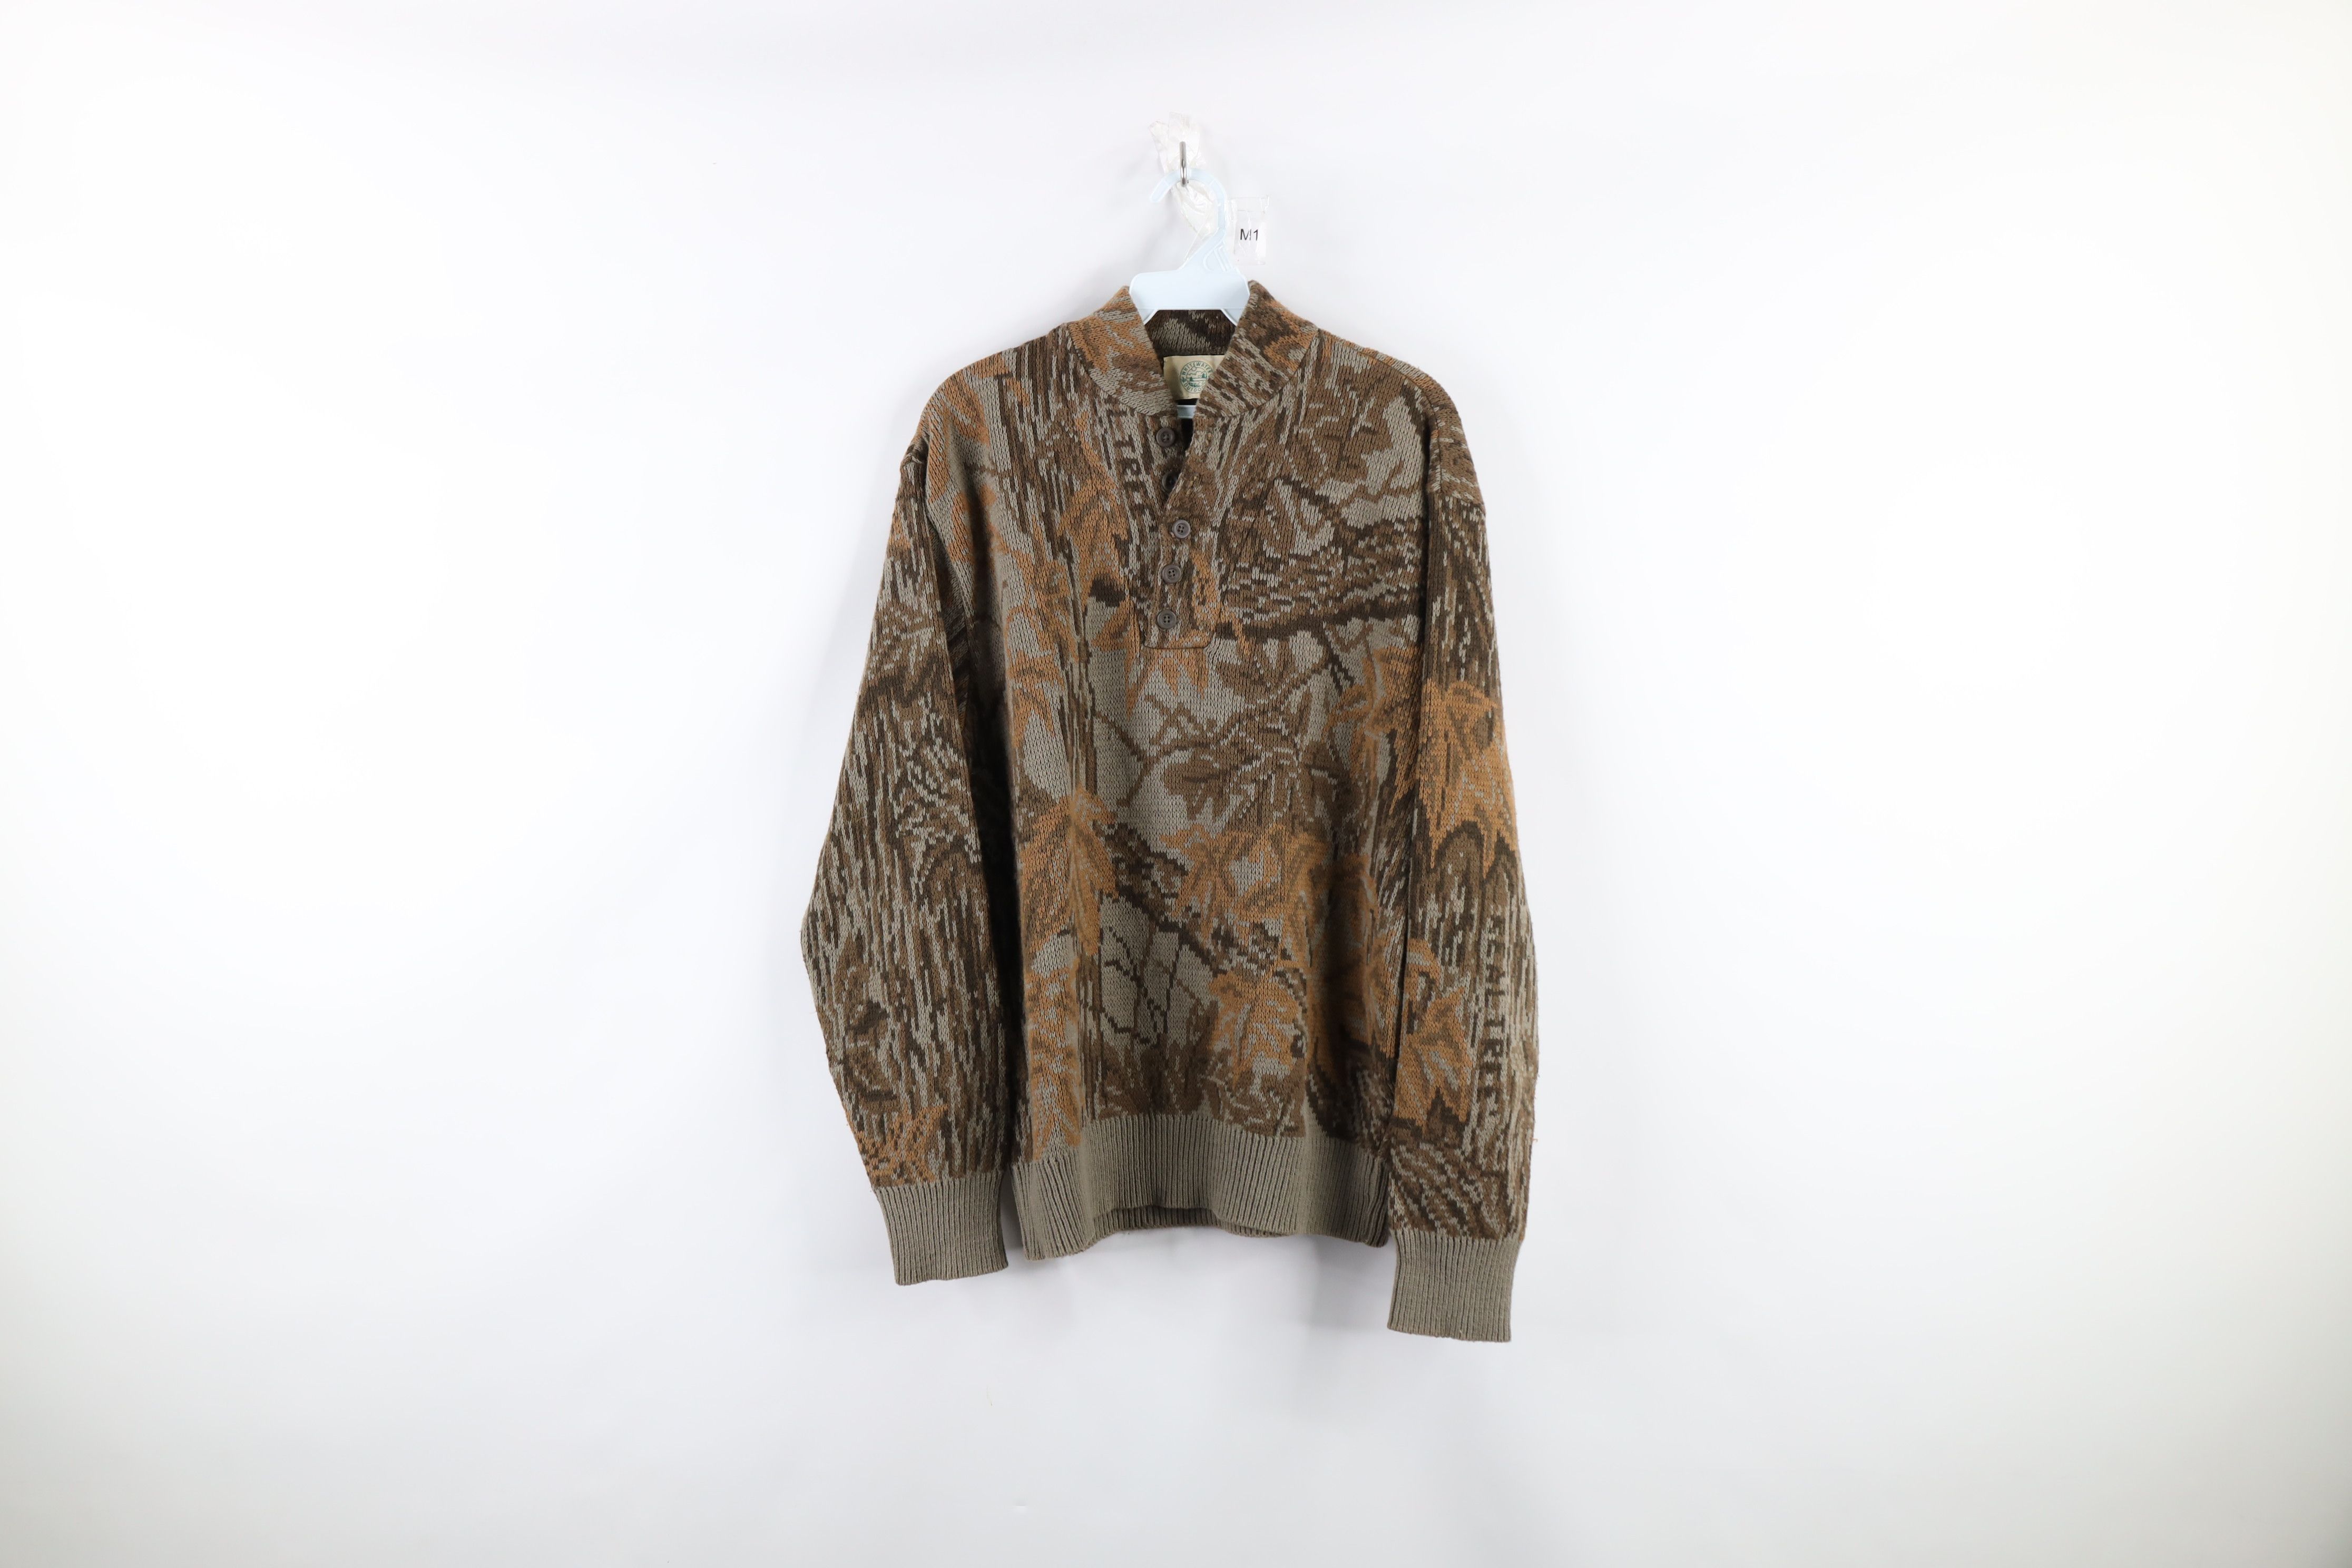 Vintage Vintage 90s Streetwear Realtree Camouflage Henley Sweater Size US M / EU 48-50 / 2 - 1 Preview